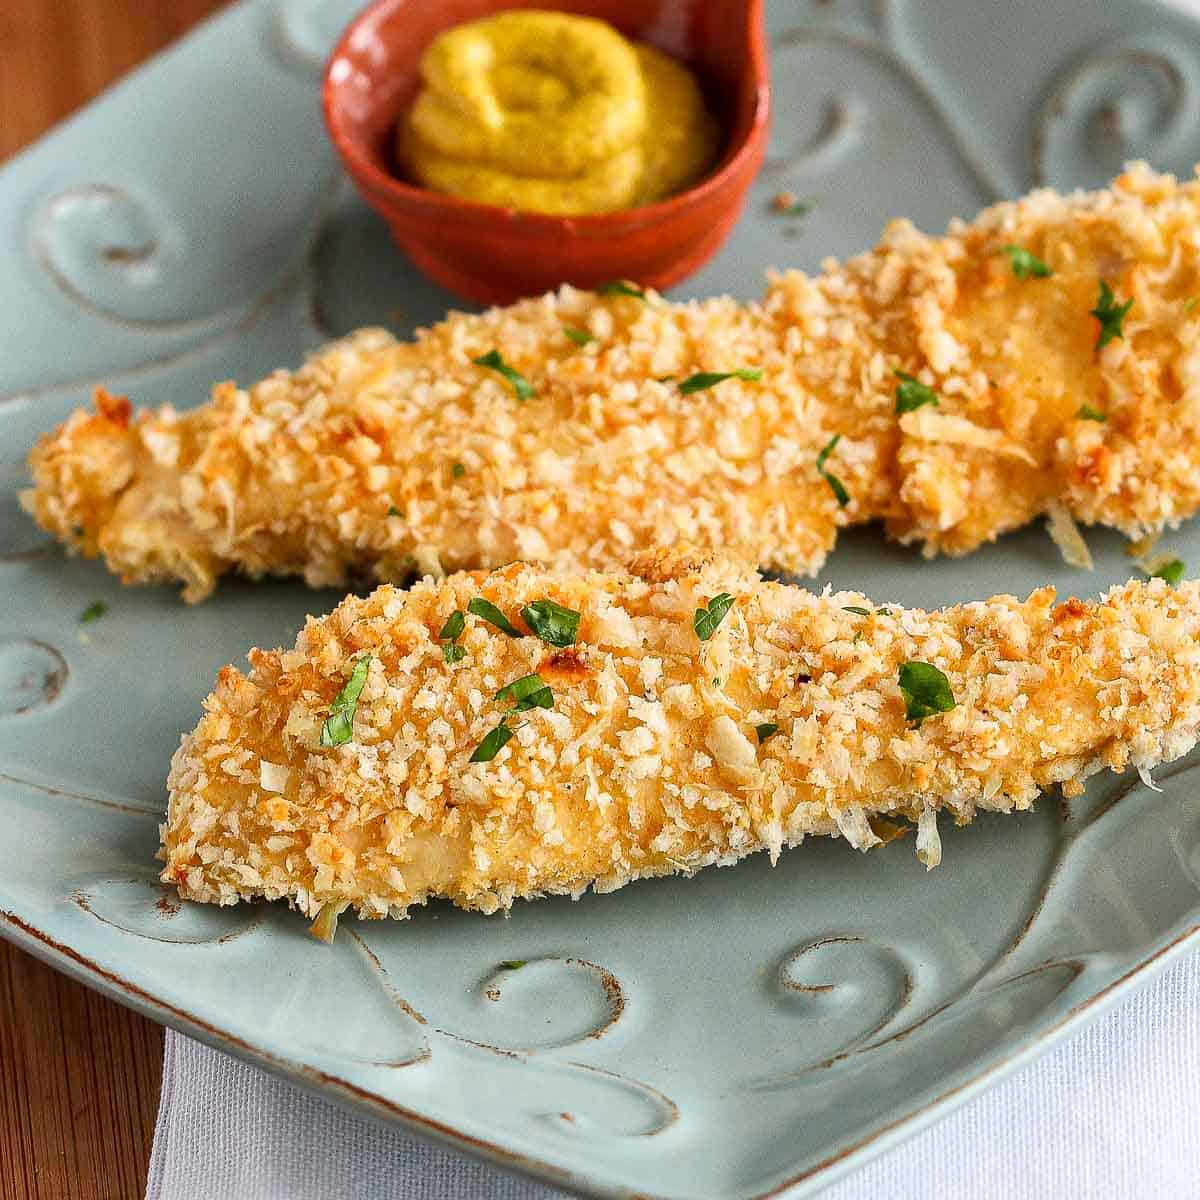 Crusted chicken strips on a blue plate with a side of mustard.